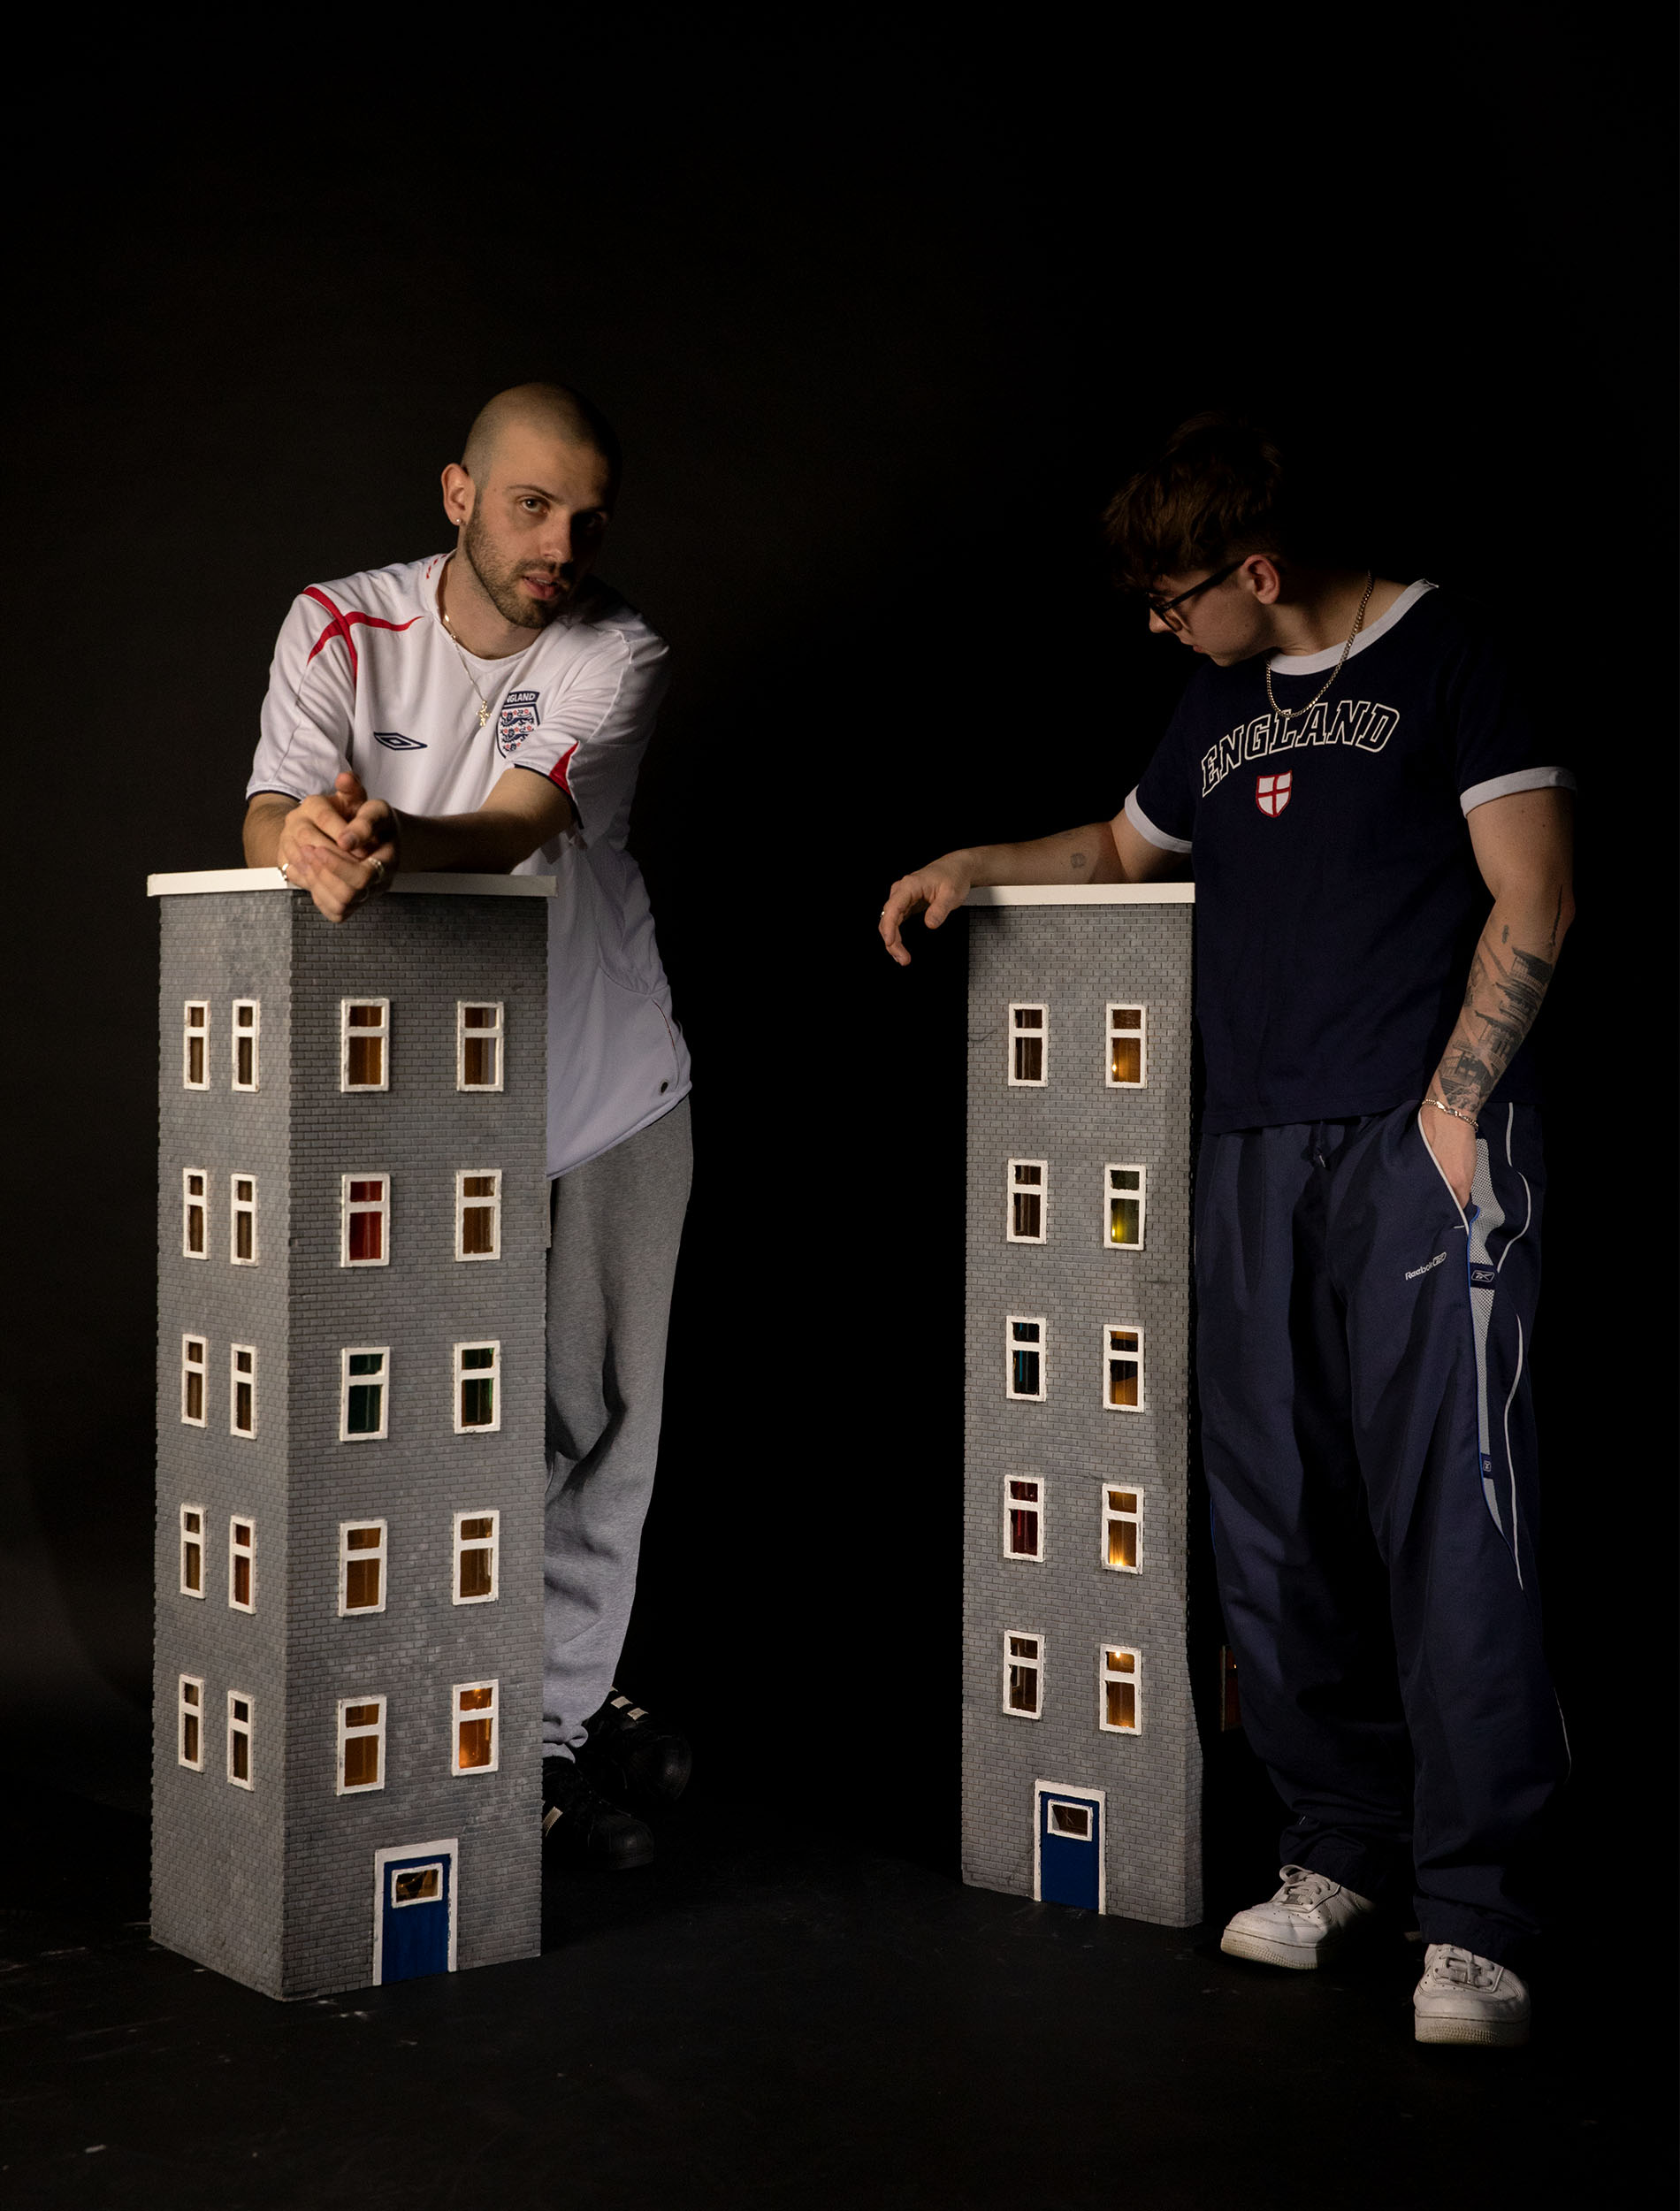 Collaboration work with Annie Wicks and myself showing two men stood between two model tower blocks